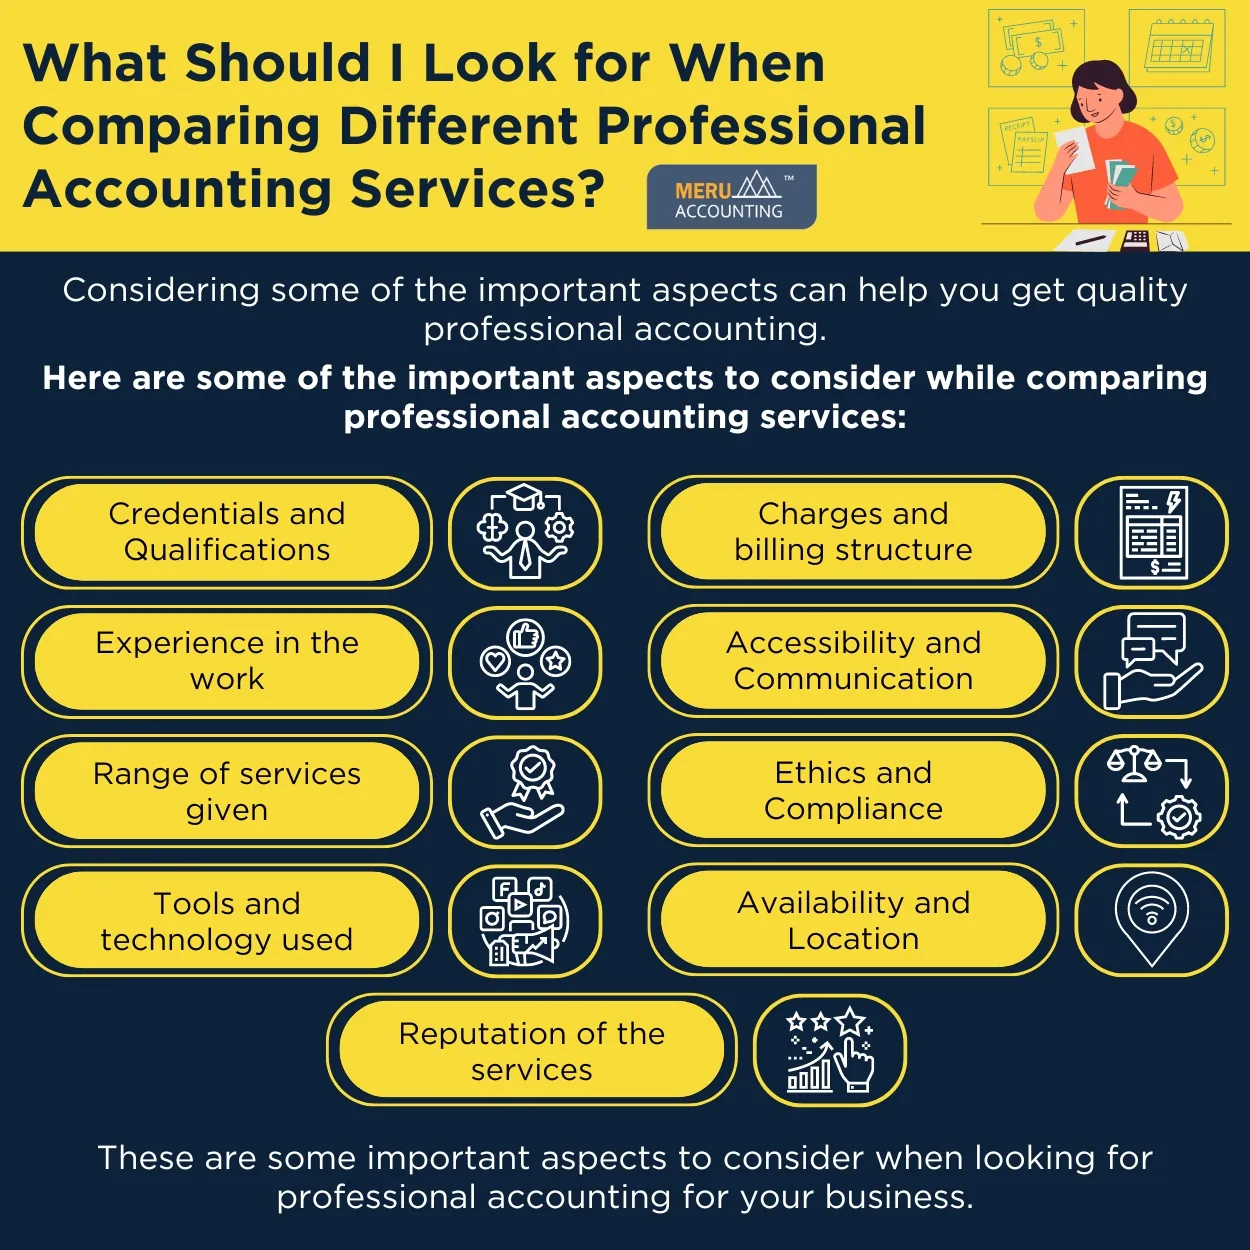 professional accounting services